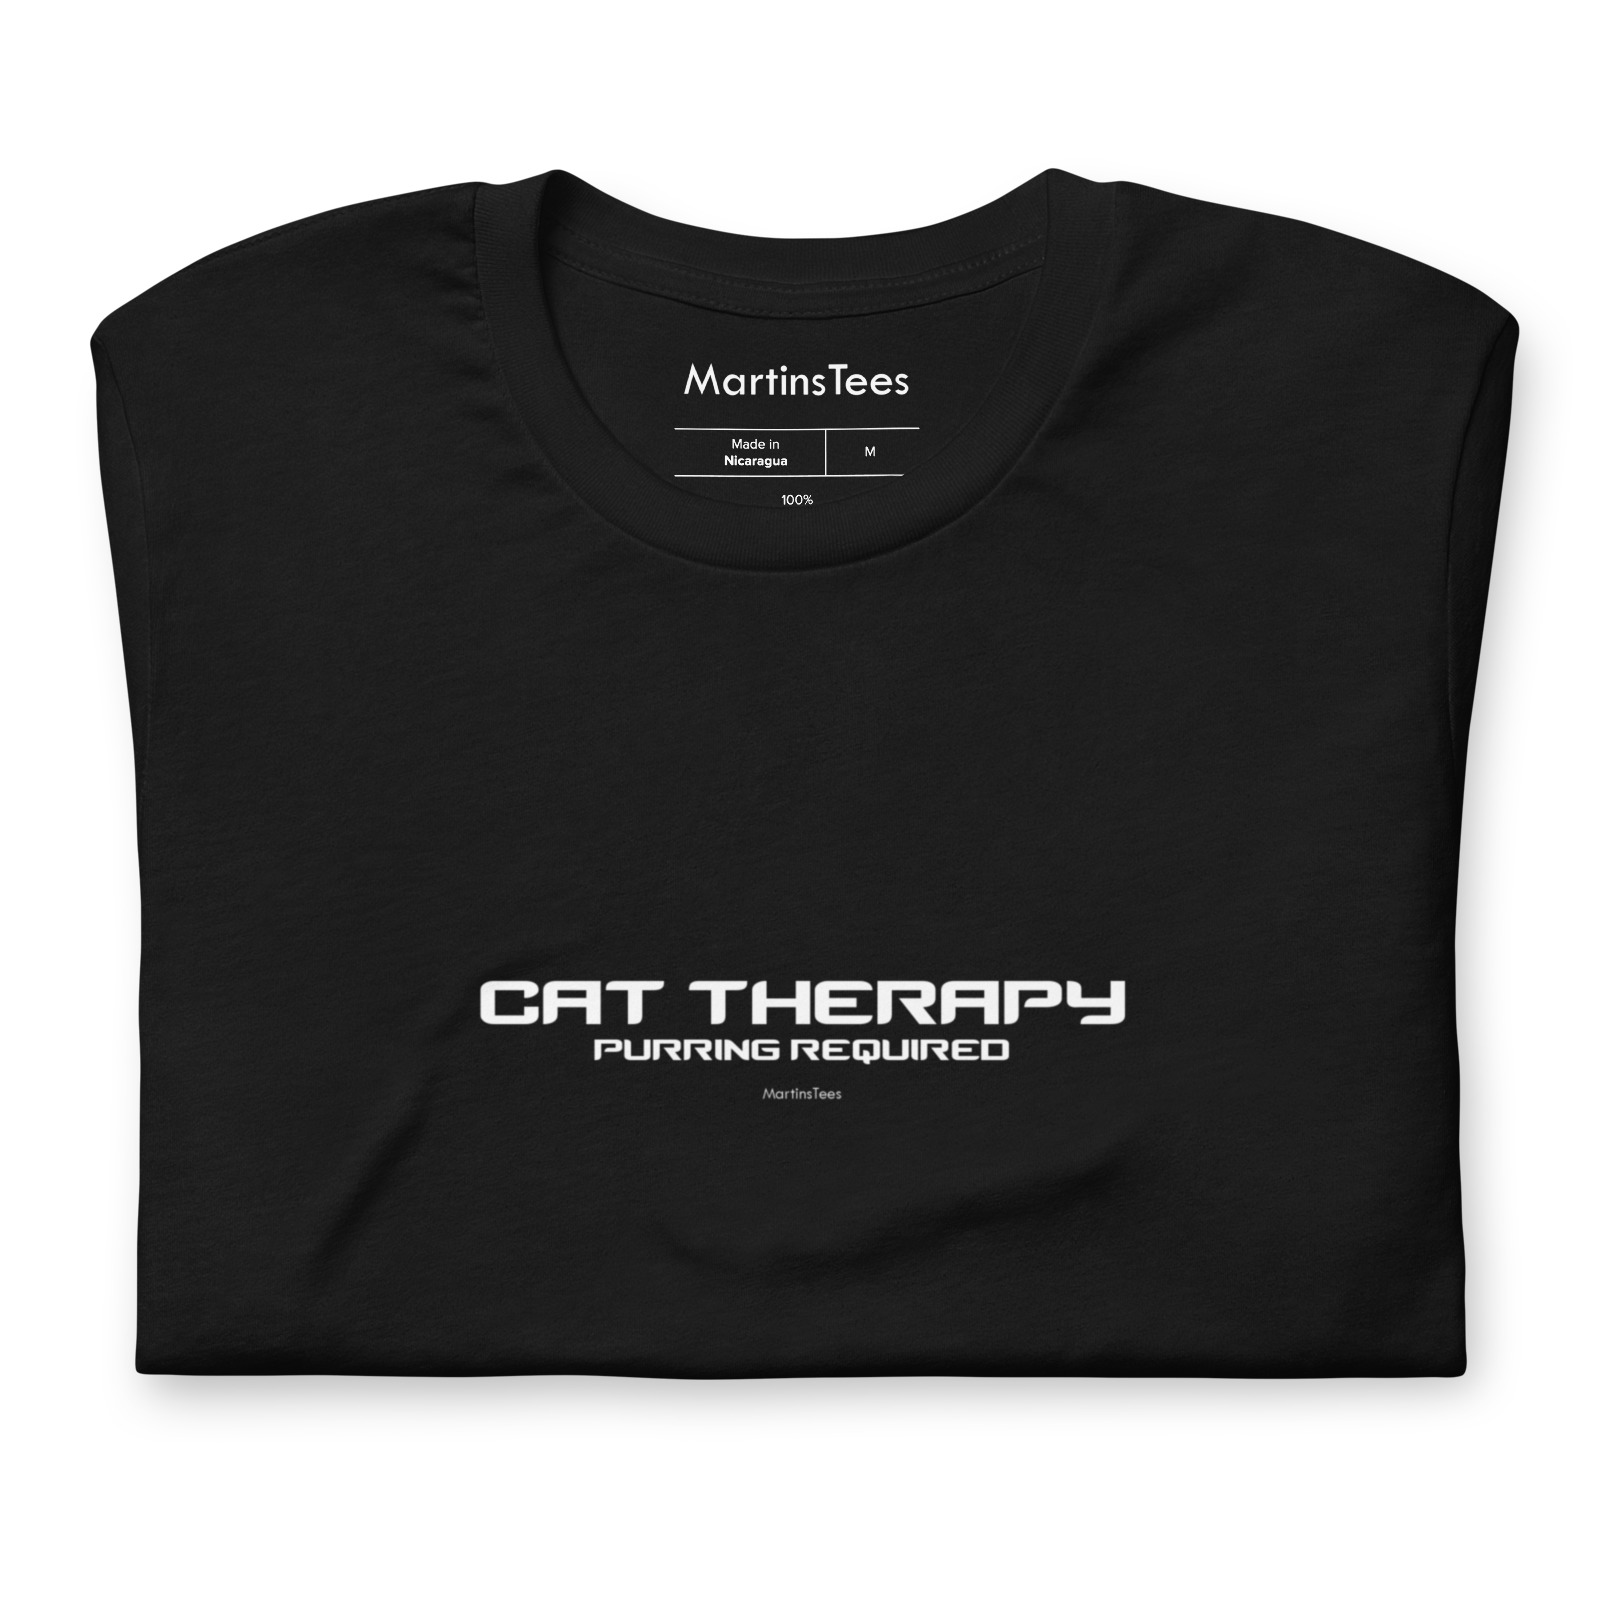 T-shirt: CAT THERAPY - PURRING REQUIRED